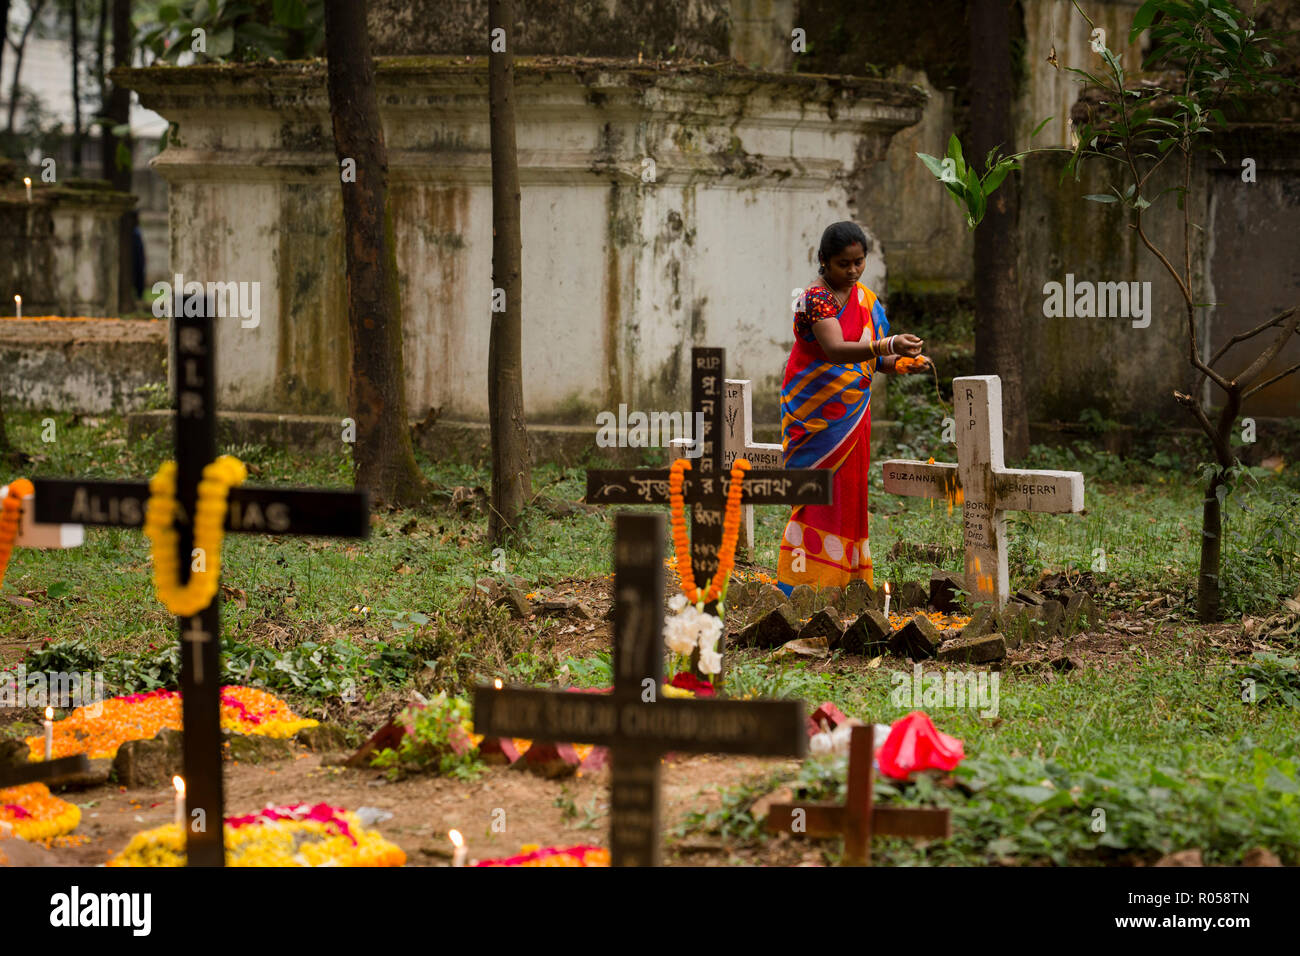 Dhaka, Bangladesh. 2nd Nov 2018.  Christian devotees observe All Souls' Day, known as the Feast of All Souls, Commemoration of all the Faithful Departed in Dhaka , Bangladesh on November 02, 2018.  On this day, Christians come to the graveyard and pray for the departed souls of their loved ones..All Soul's Day is a Roman Catholic day of remembrance for friends and loved ones who have passed away. Credit: zakir hossain chowdhury zakir/Alamy Live News Stock Photo